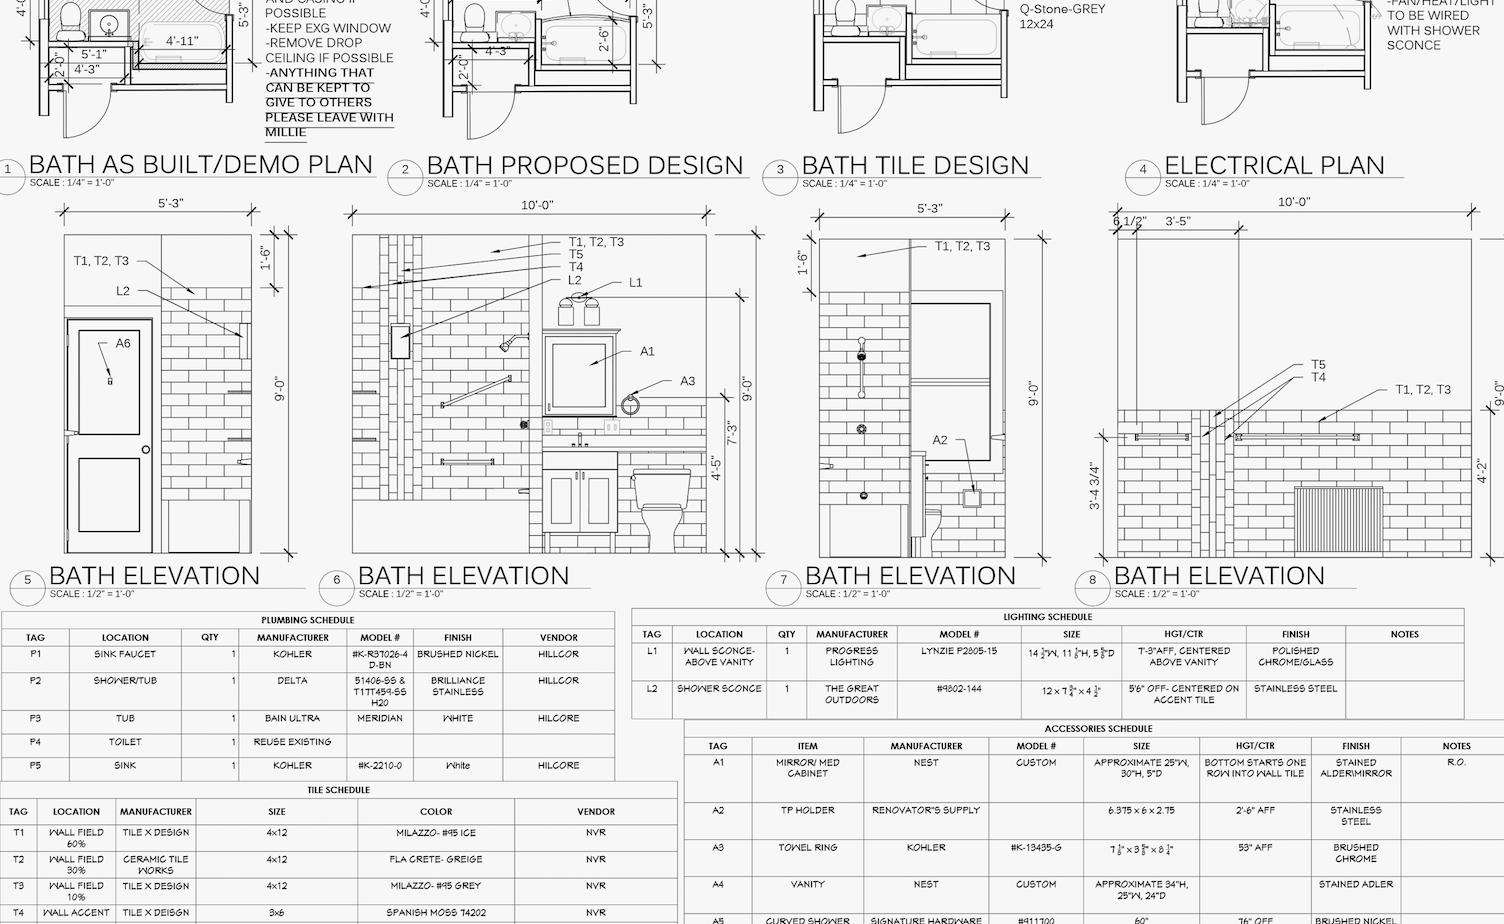 example of specifications for a remodeling project by Otagawa-Anschel Design+Build